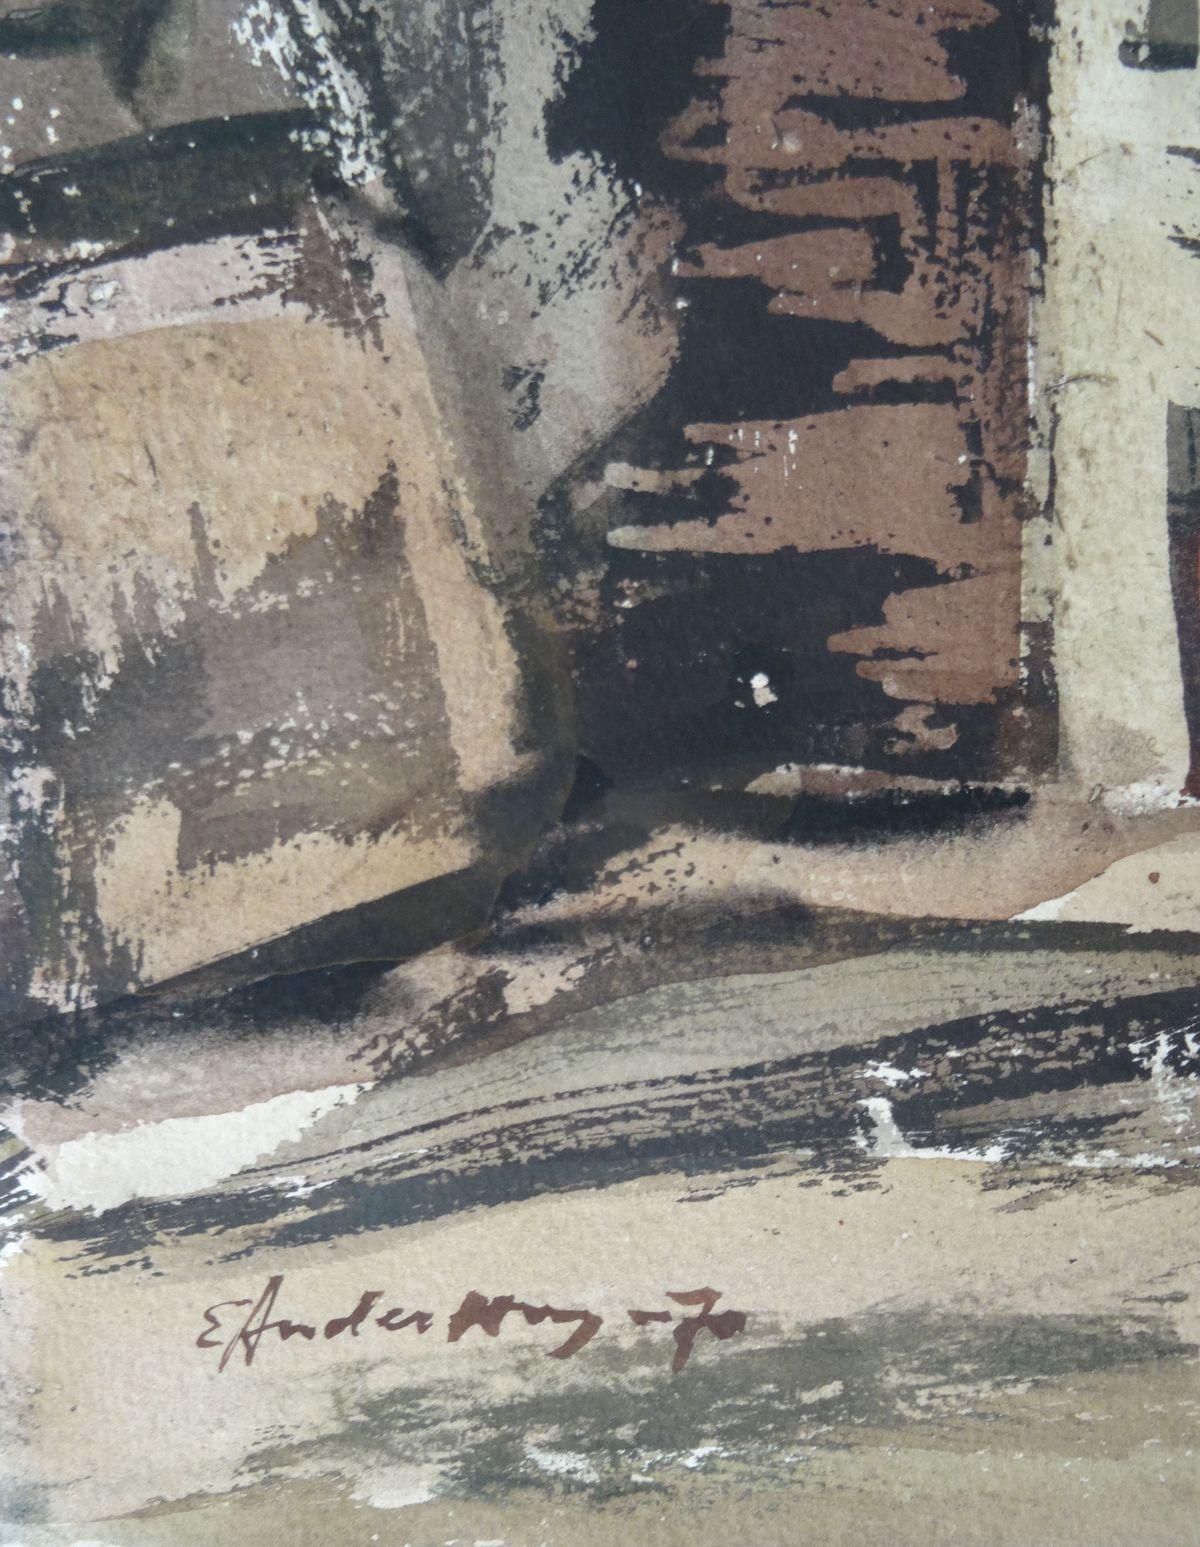 Old City. 1970. Paper, watercolor, 46x37 cm - Painting by Edwin Andersons